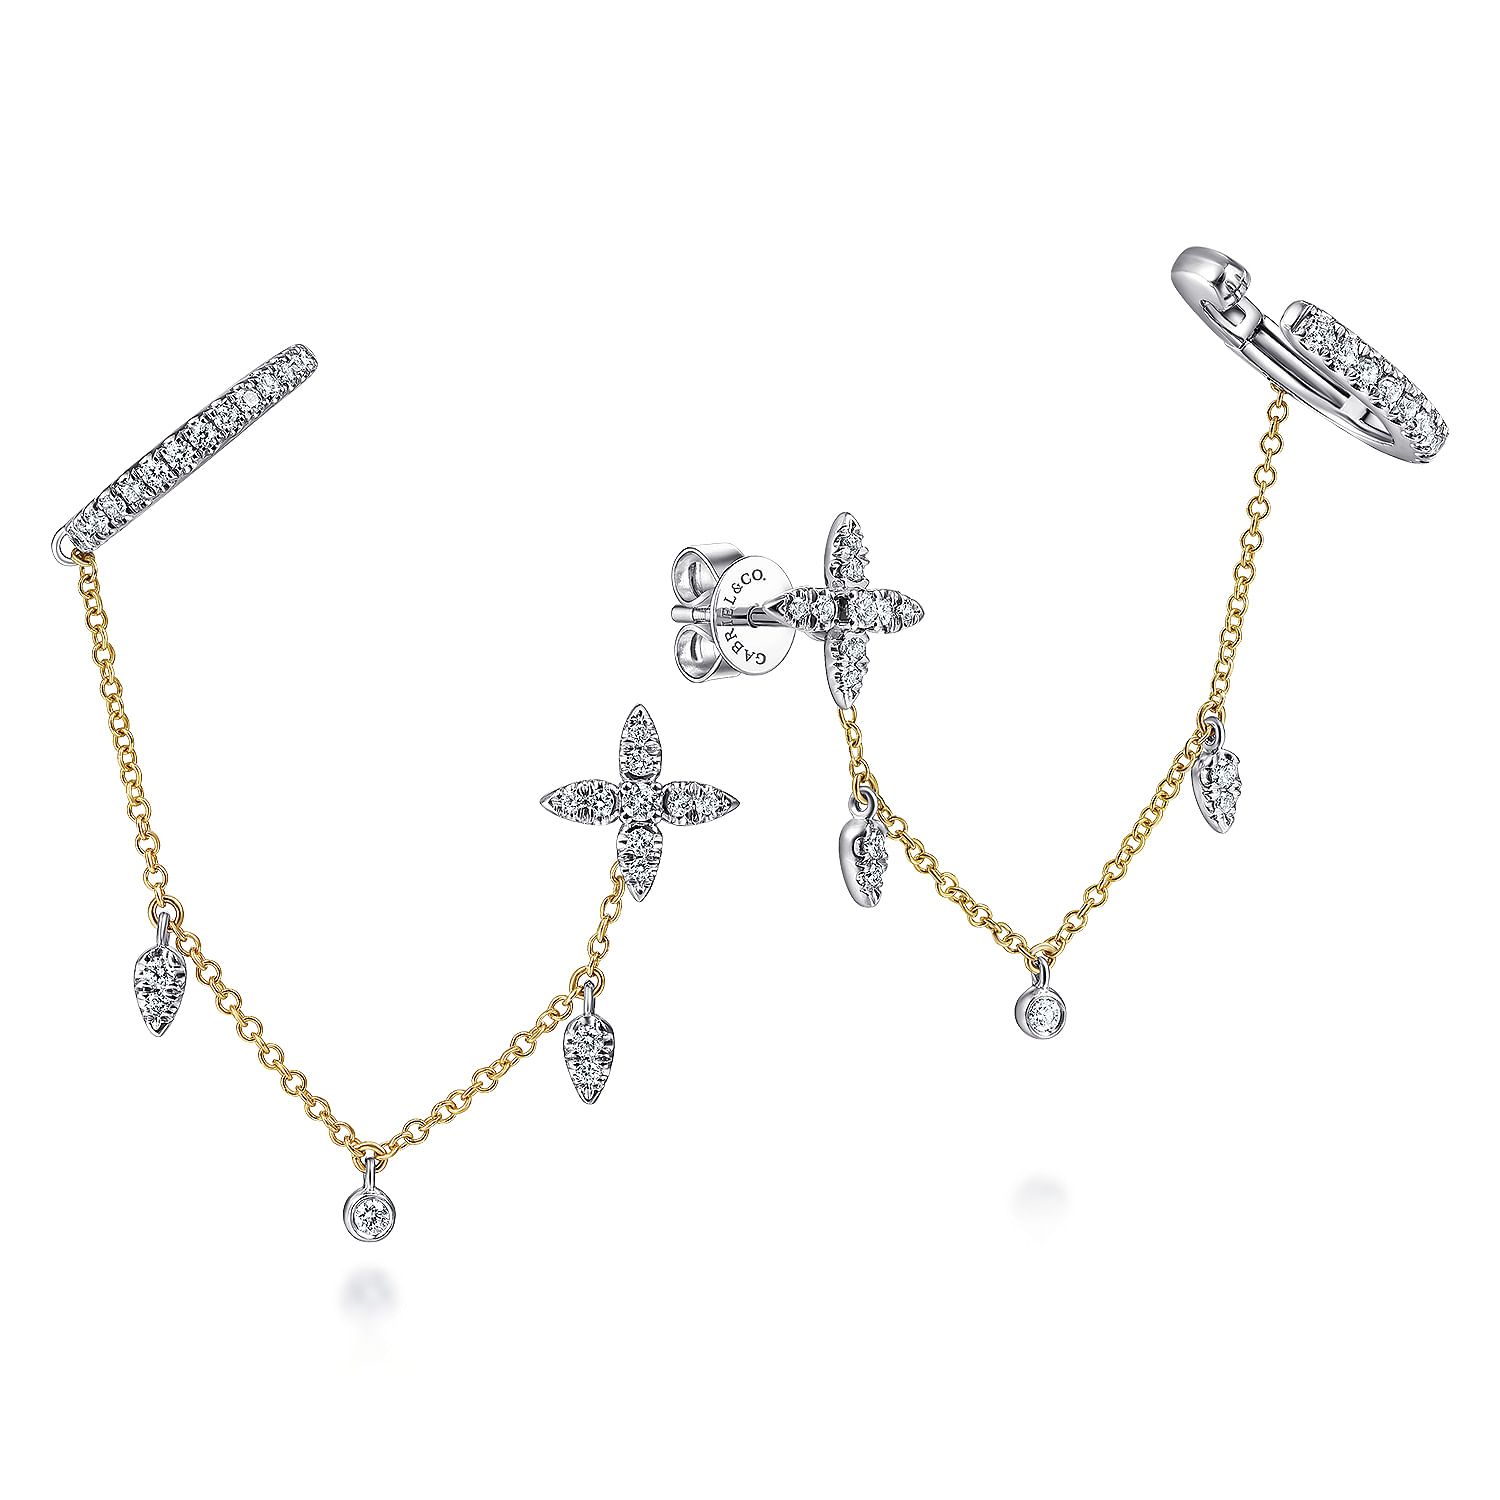 14K-Yellow-White-Gold-Diamond-Ear-Cuffs-and-Quatrefoil-Chain-Earrings-with-Drops1